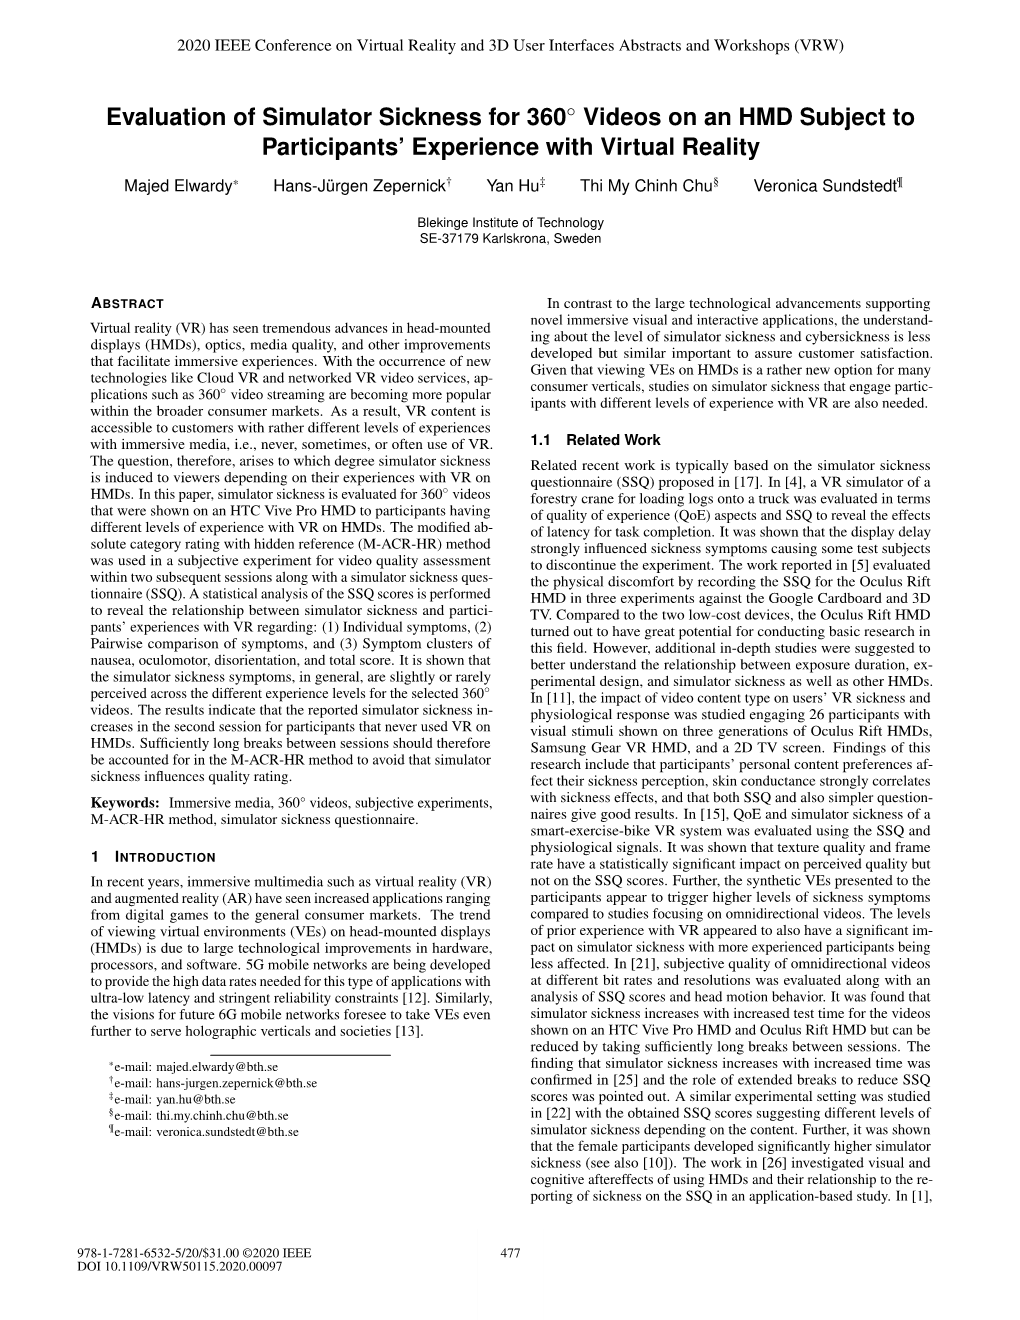 Evaluation of Simulator Sickness for 360° Videos on an HMD Subject To